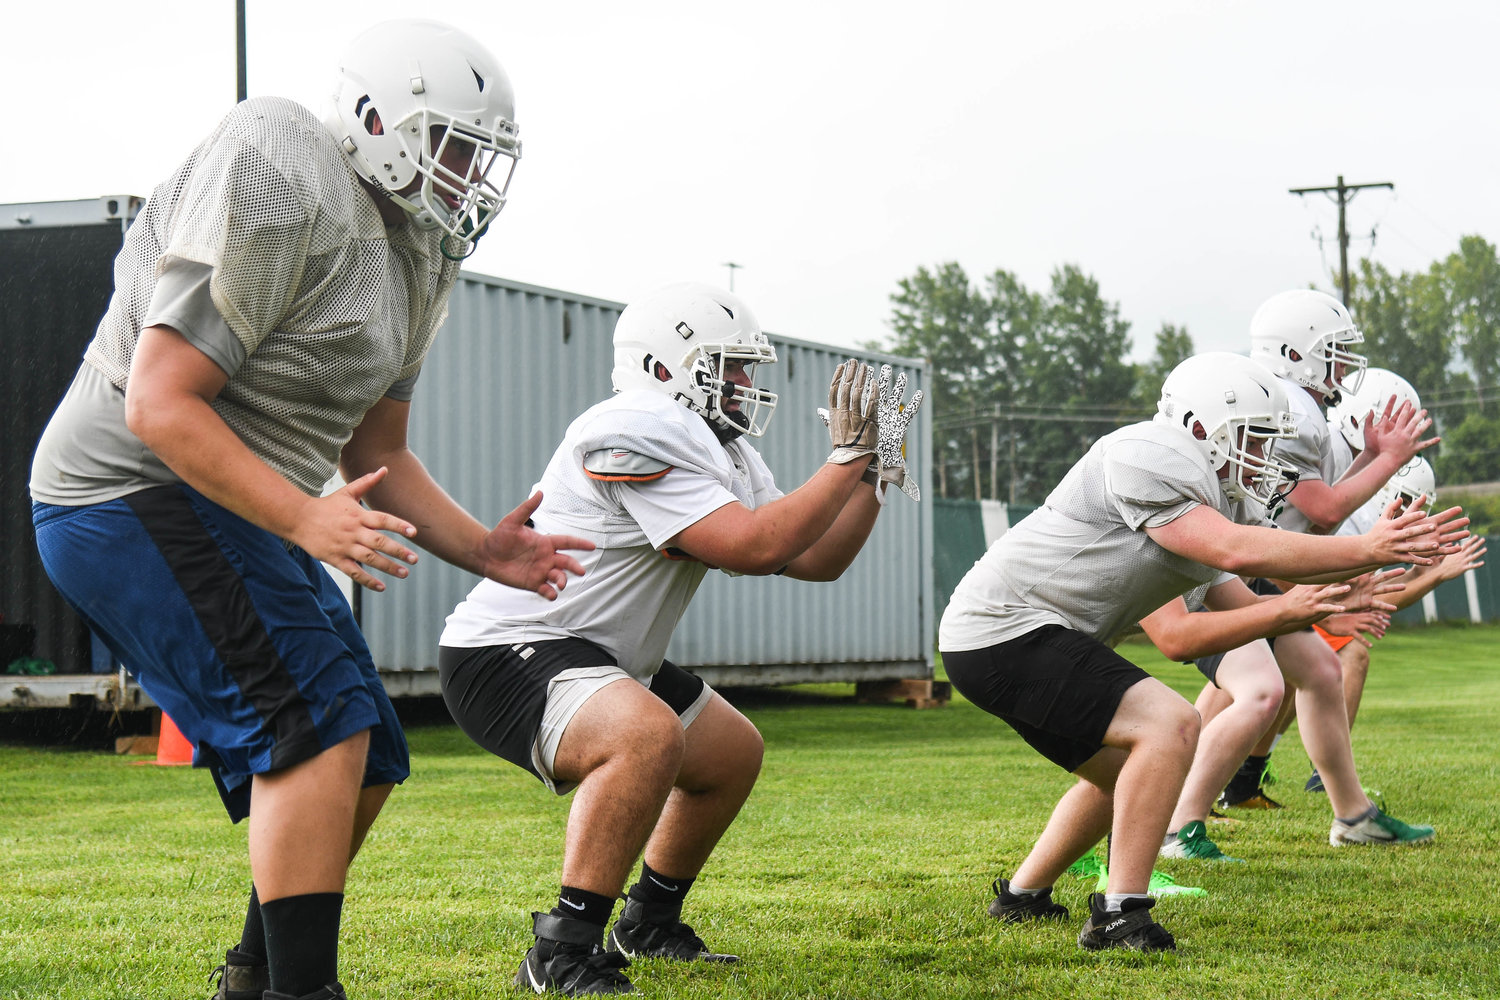 Herkimer linemen work on drills early during practice. Herkimer’s coach Mike Jory said the linemen are “bigger, faster and stronger” compared to last fall.